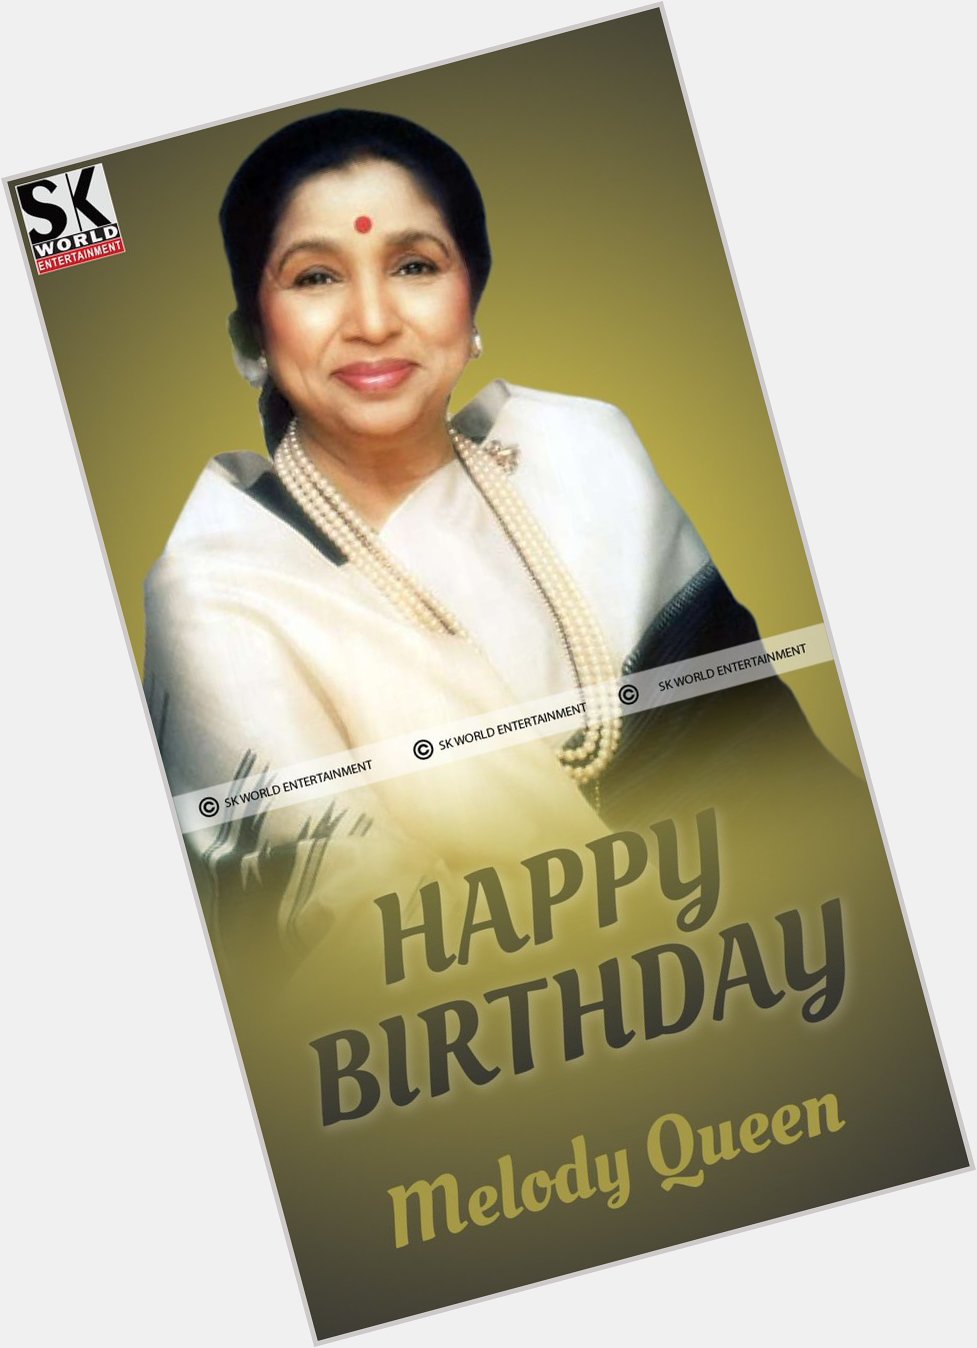 Wishing our melody queen a Happy Birthday On behalf of SK World Entertainment.
Asha Bhosle-         